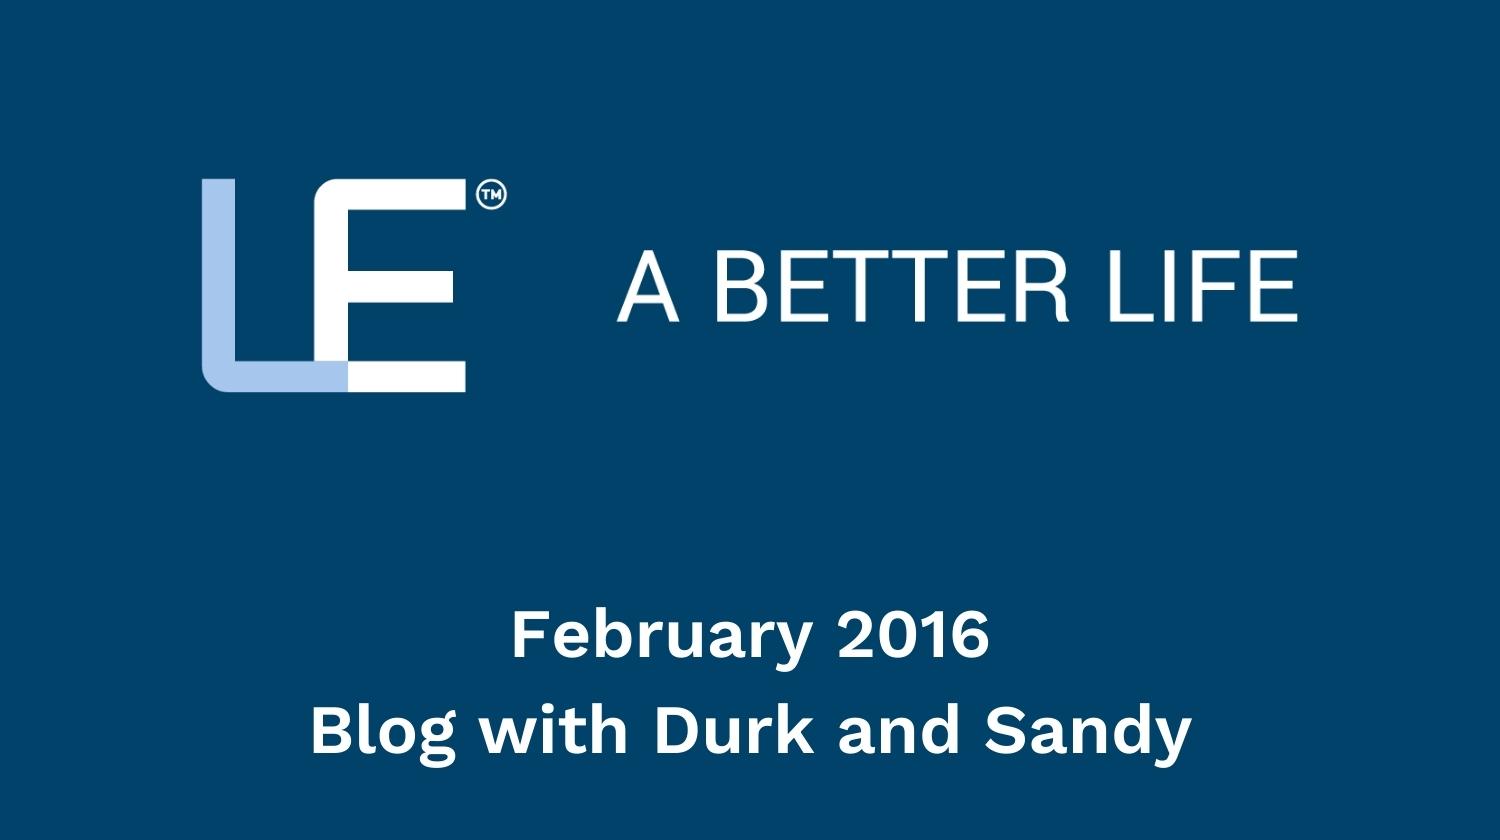 February 2016 Blog with Durk and Sandy